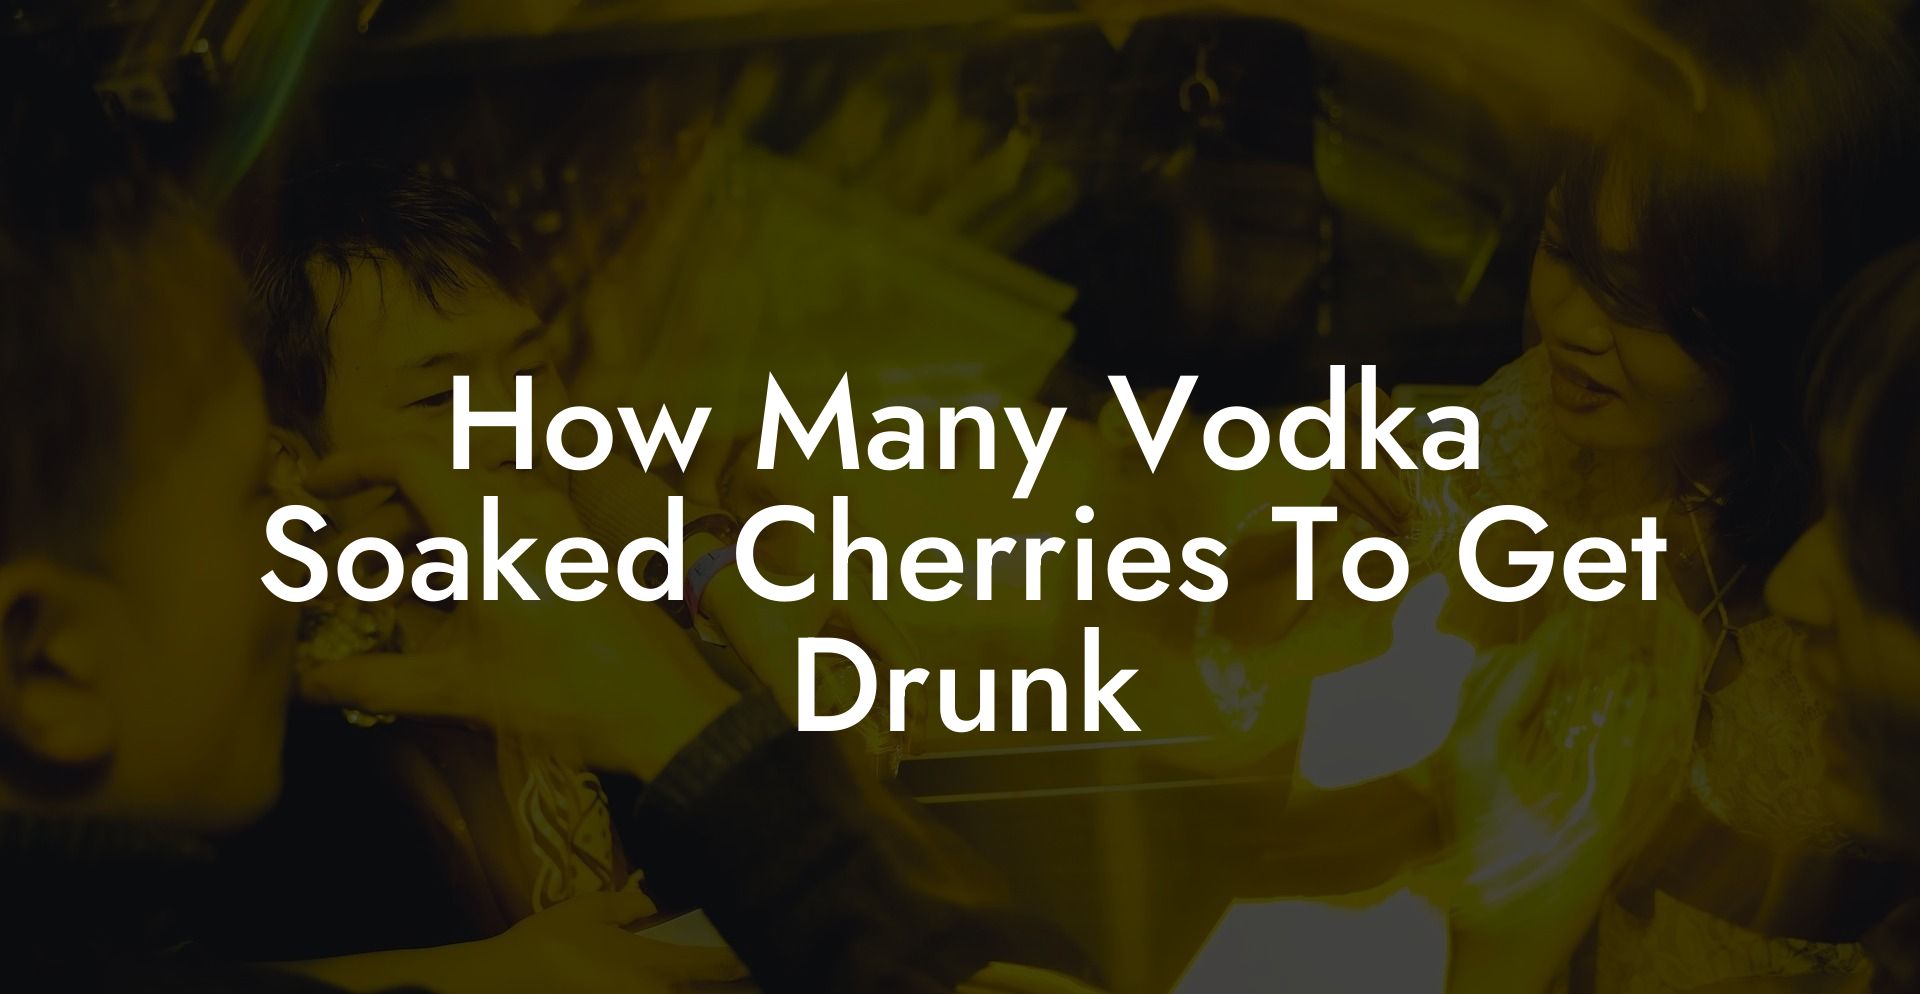 How Many Vodka Soaked Cherries To Get Drunk